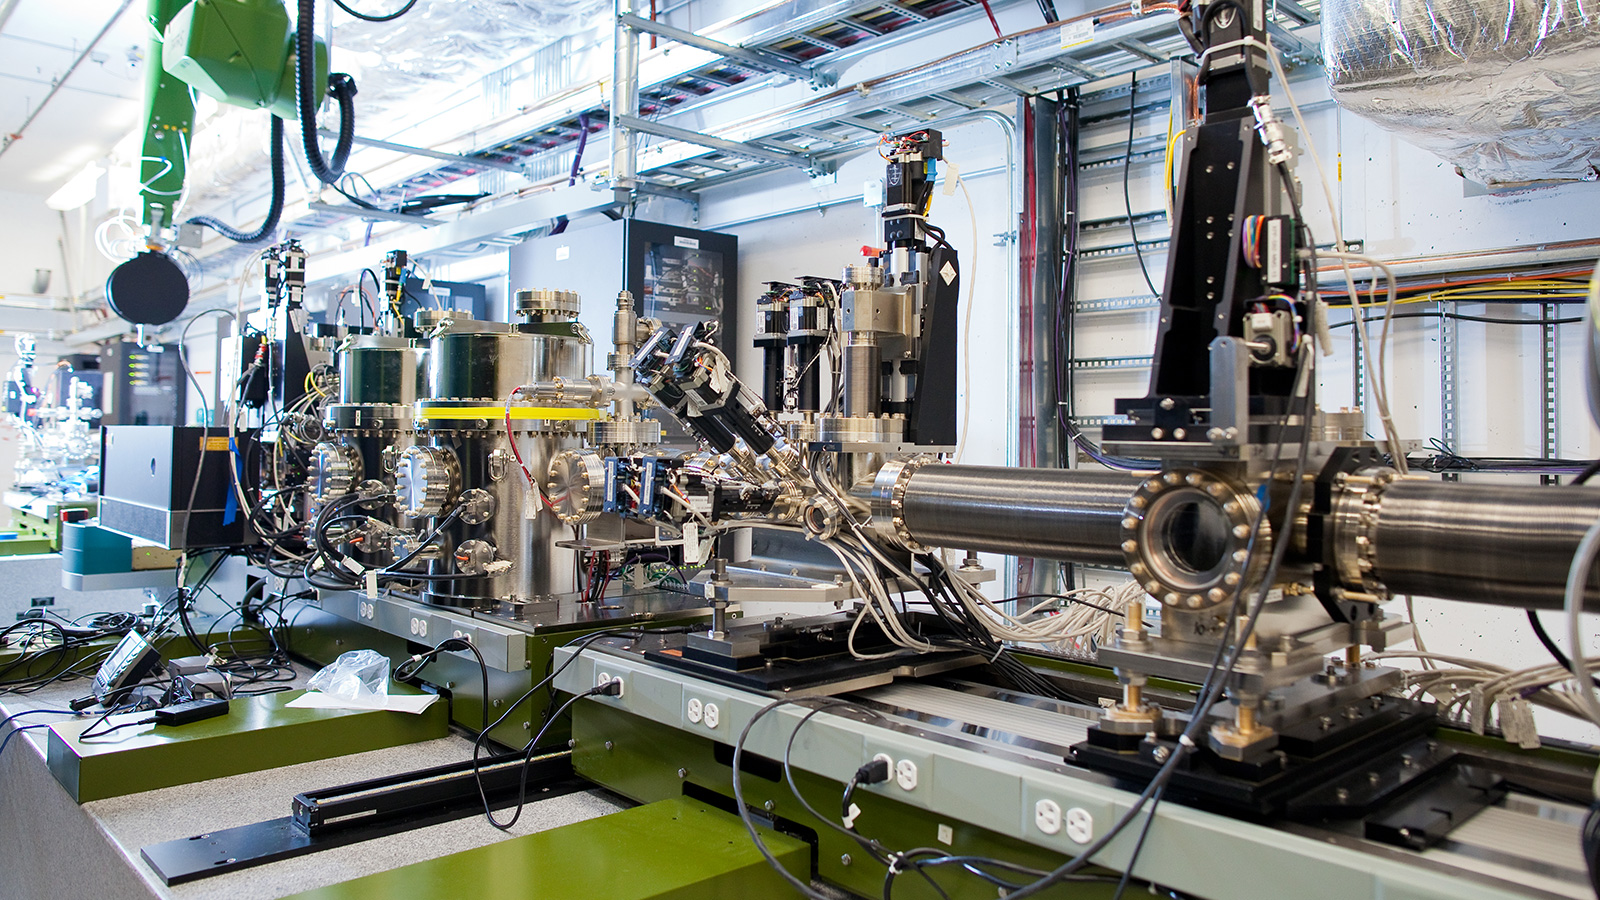 An experimental station at SLAC’s Linac Coherent Light Source X-ray free-electron laser where scientists used a new tool they developed to watch atoms move within a single atomic sheet. (Image courtesy of SLAC National Accelerator Laboratory.)